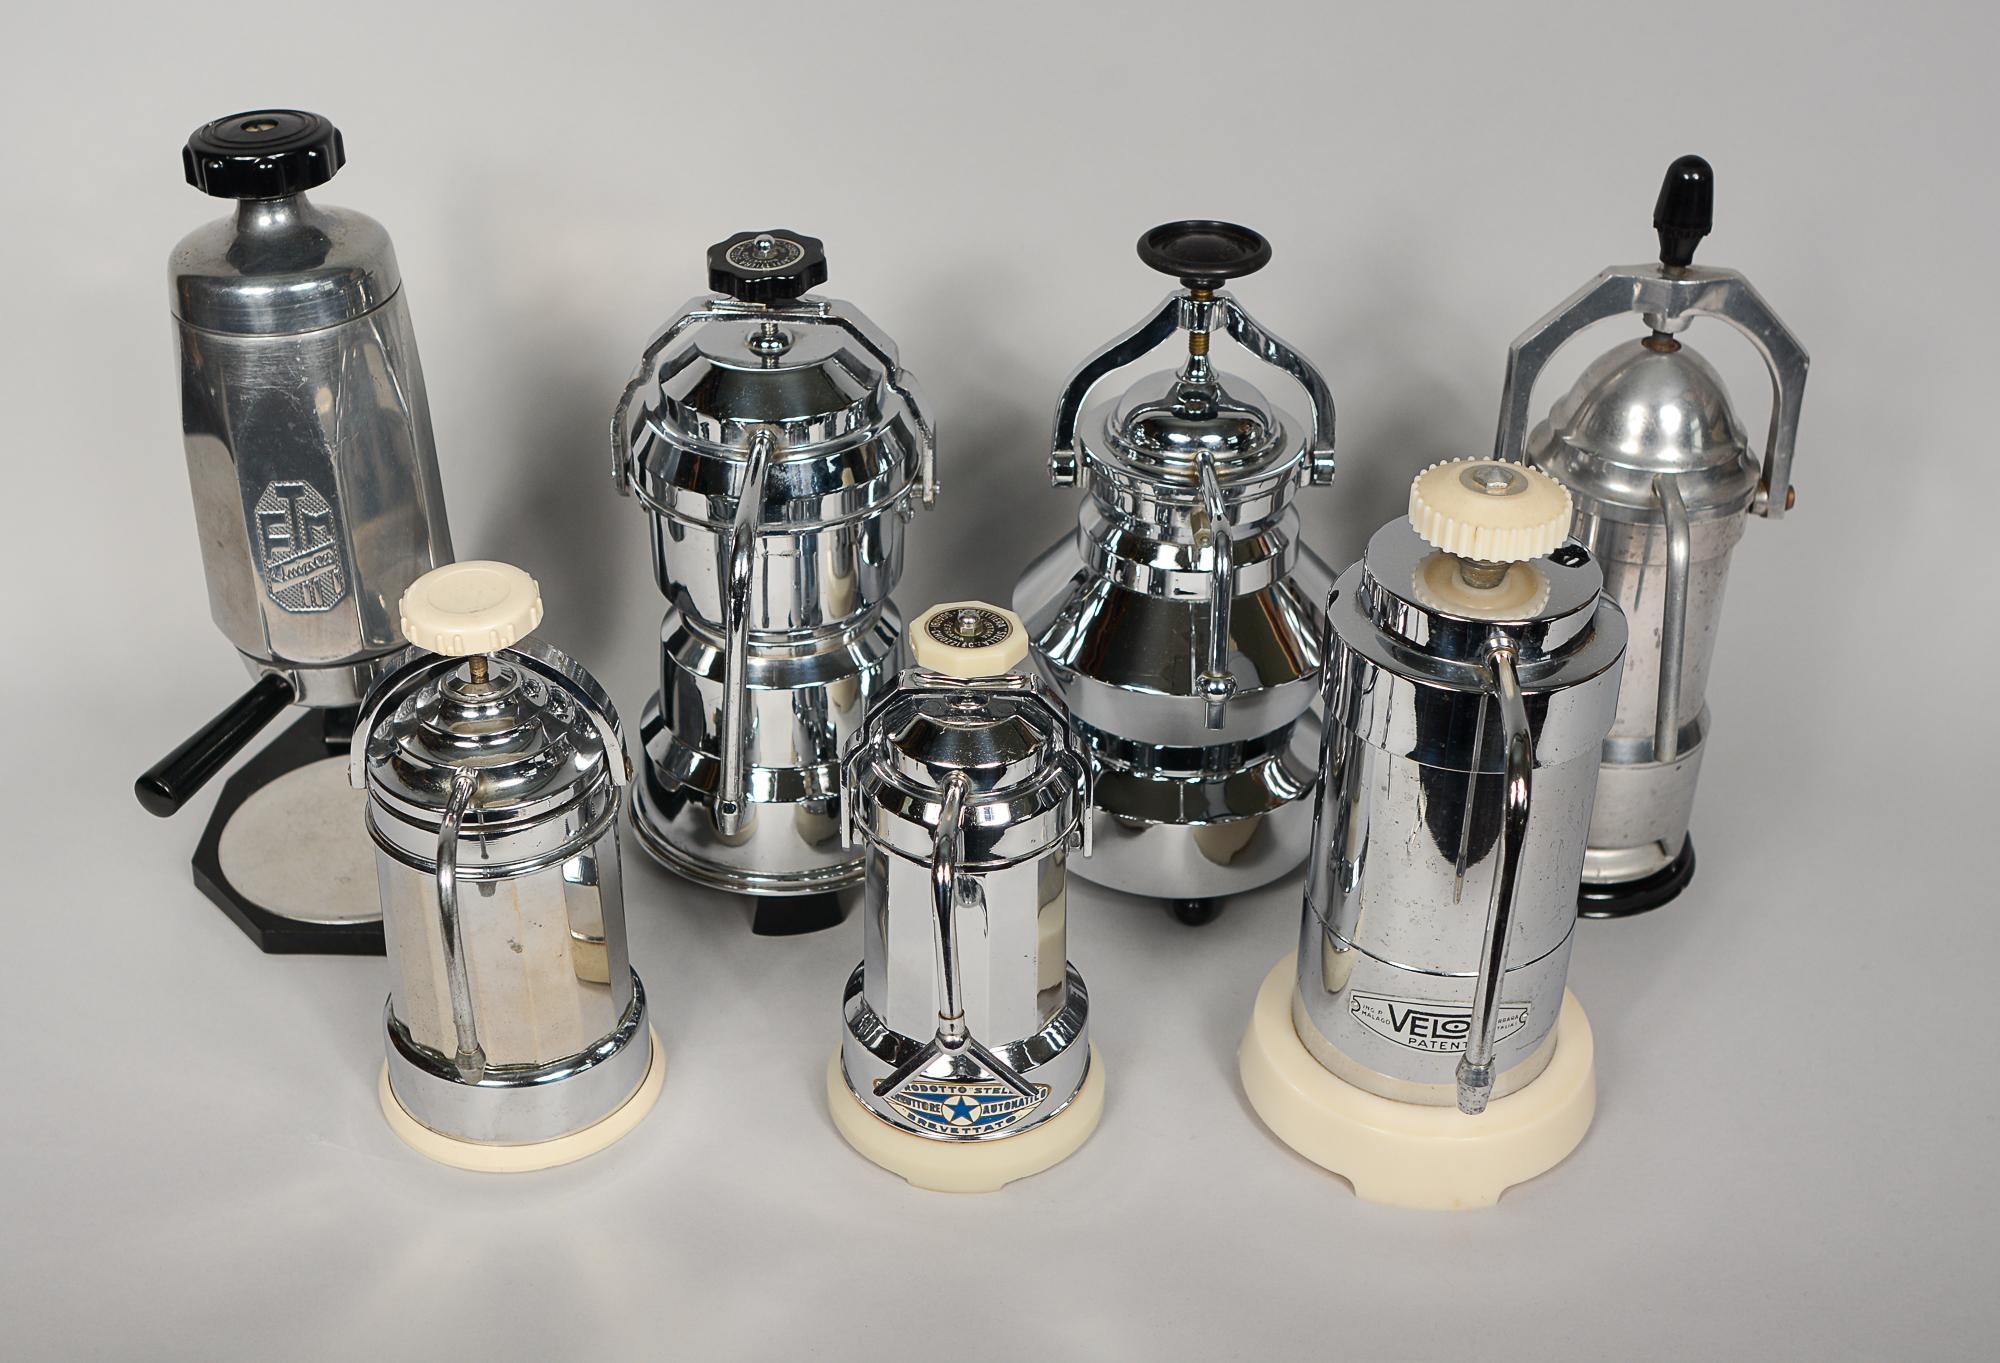 Collection of seven vintage espresso makers. Five of these have a chrome finish the other two are aluminum. There is a Paradiso, a Velox, a Prodotto Stella, a Zenit, a FTM, a Caffettiera Stella and one unbranded. These are sold as decorative items